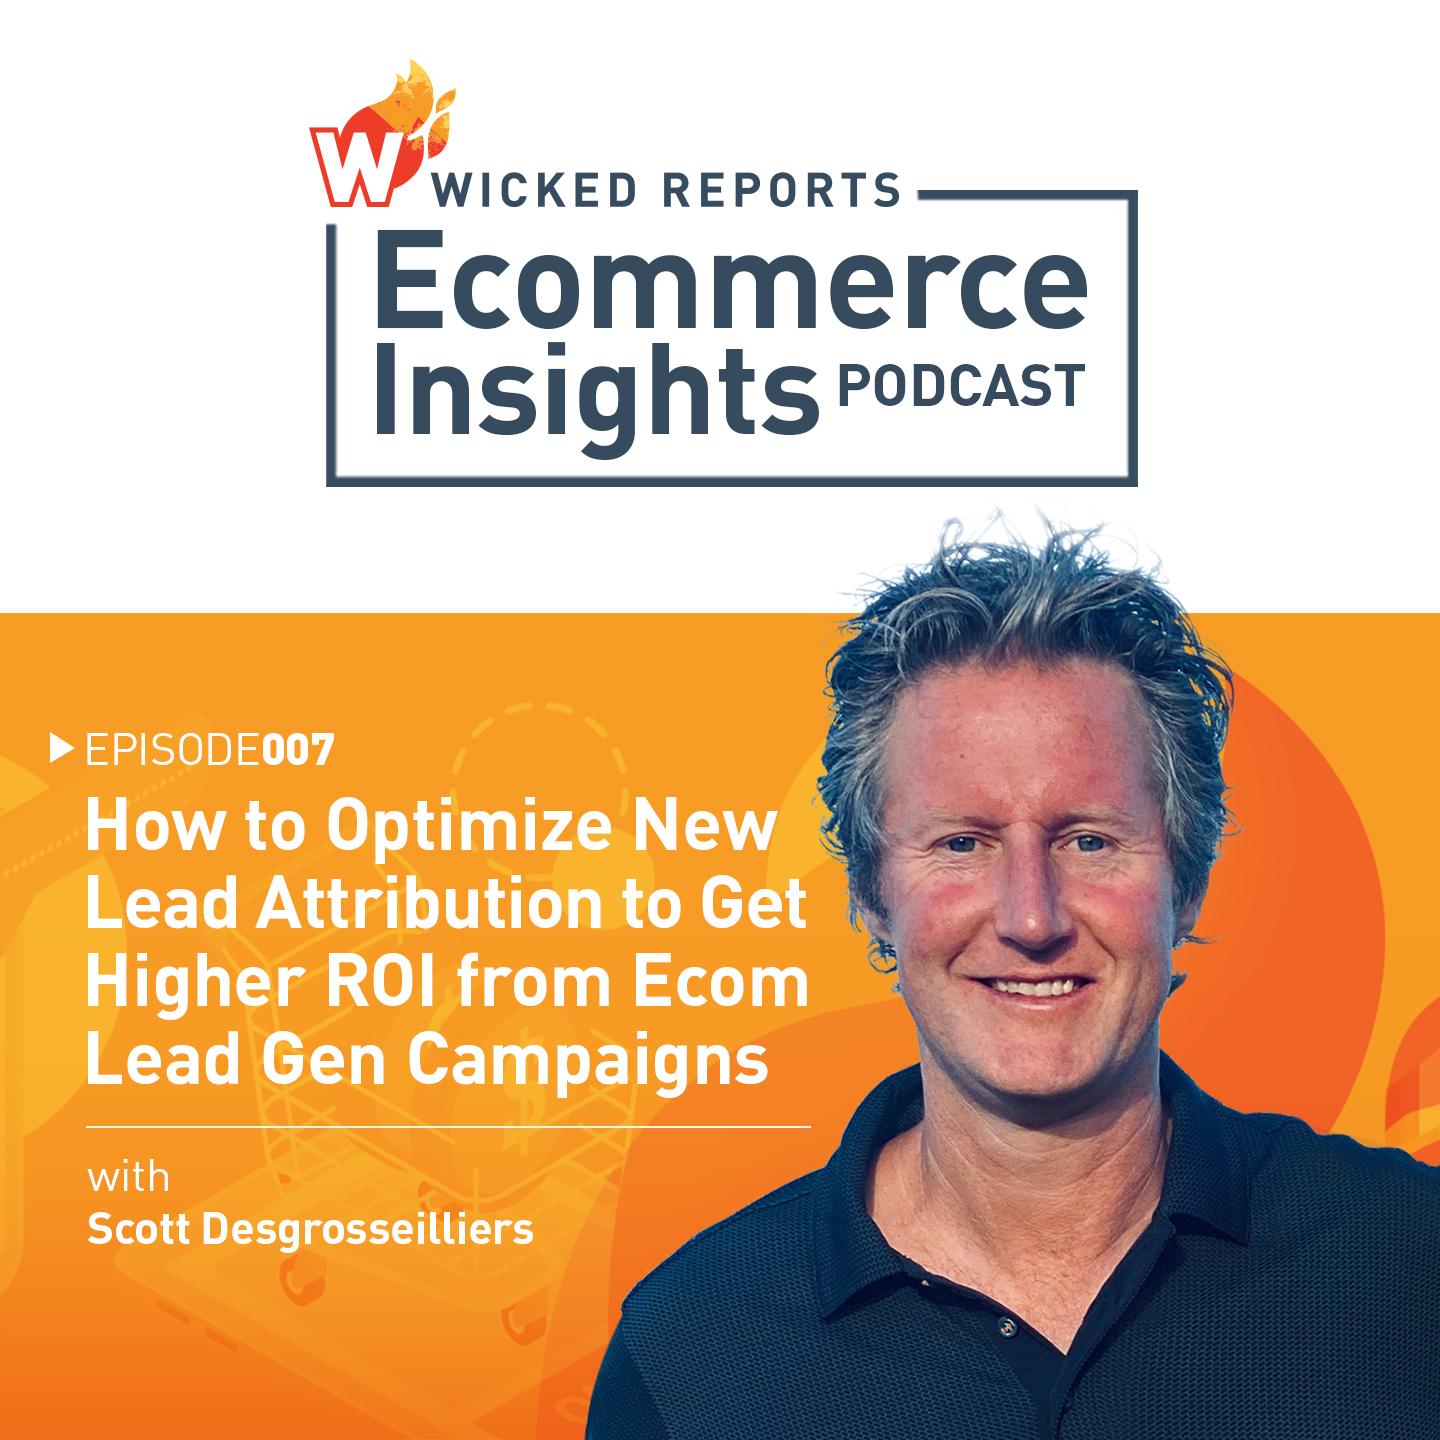 How to Optimize New Lead Attribution to Get Higher ROI from Ecom Lead Gen Campaigns